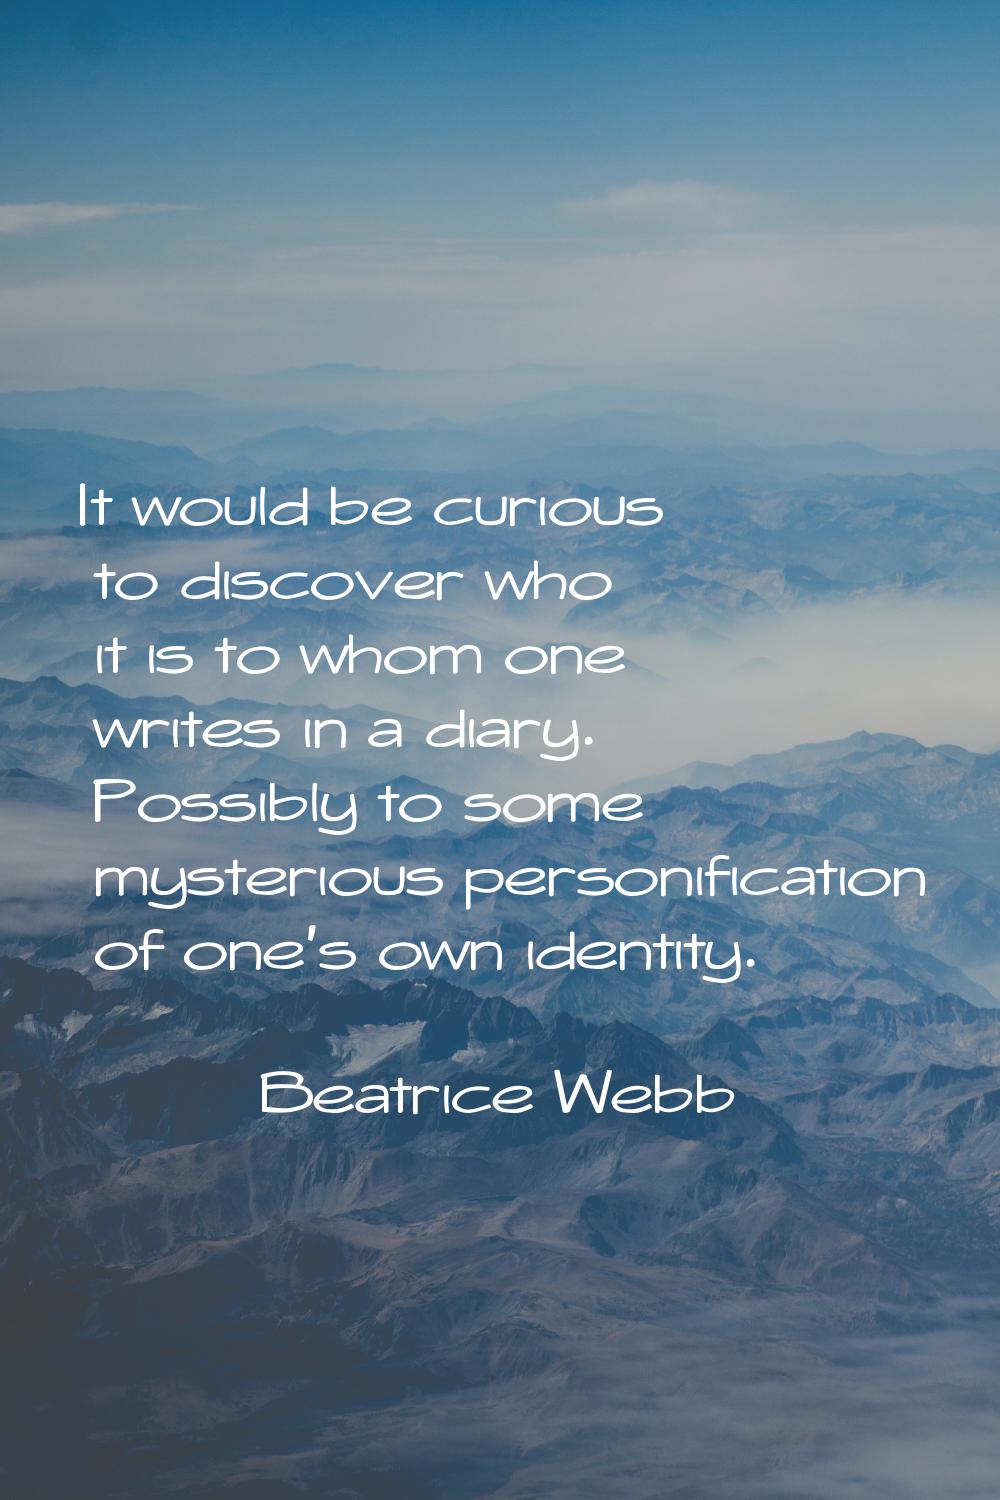 It would be curious to discover who it is to whom one writes in a diary. Possibly to some mysteriou